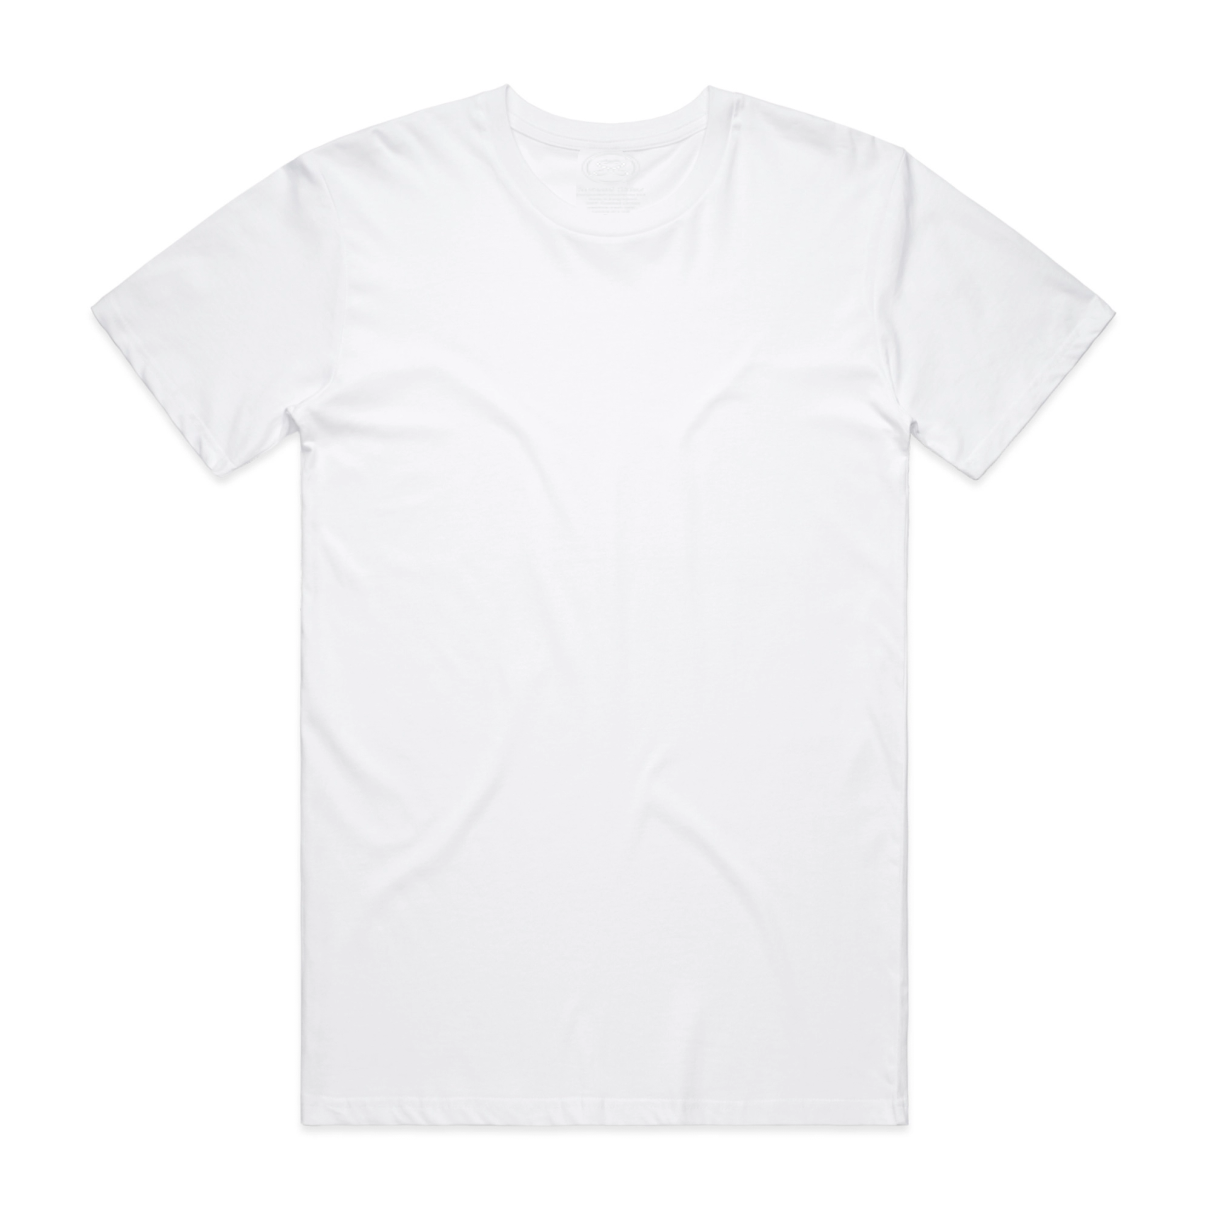 Men's Iconic Classic T-Shirt in several colors